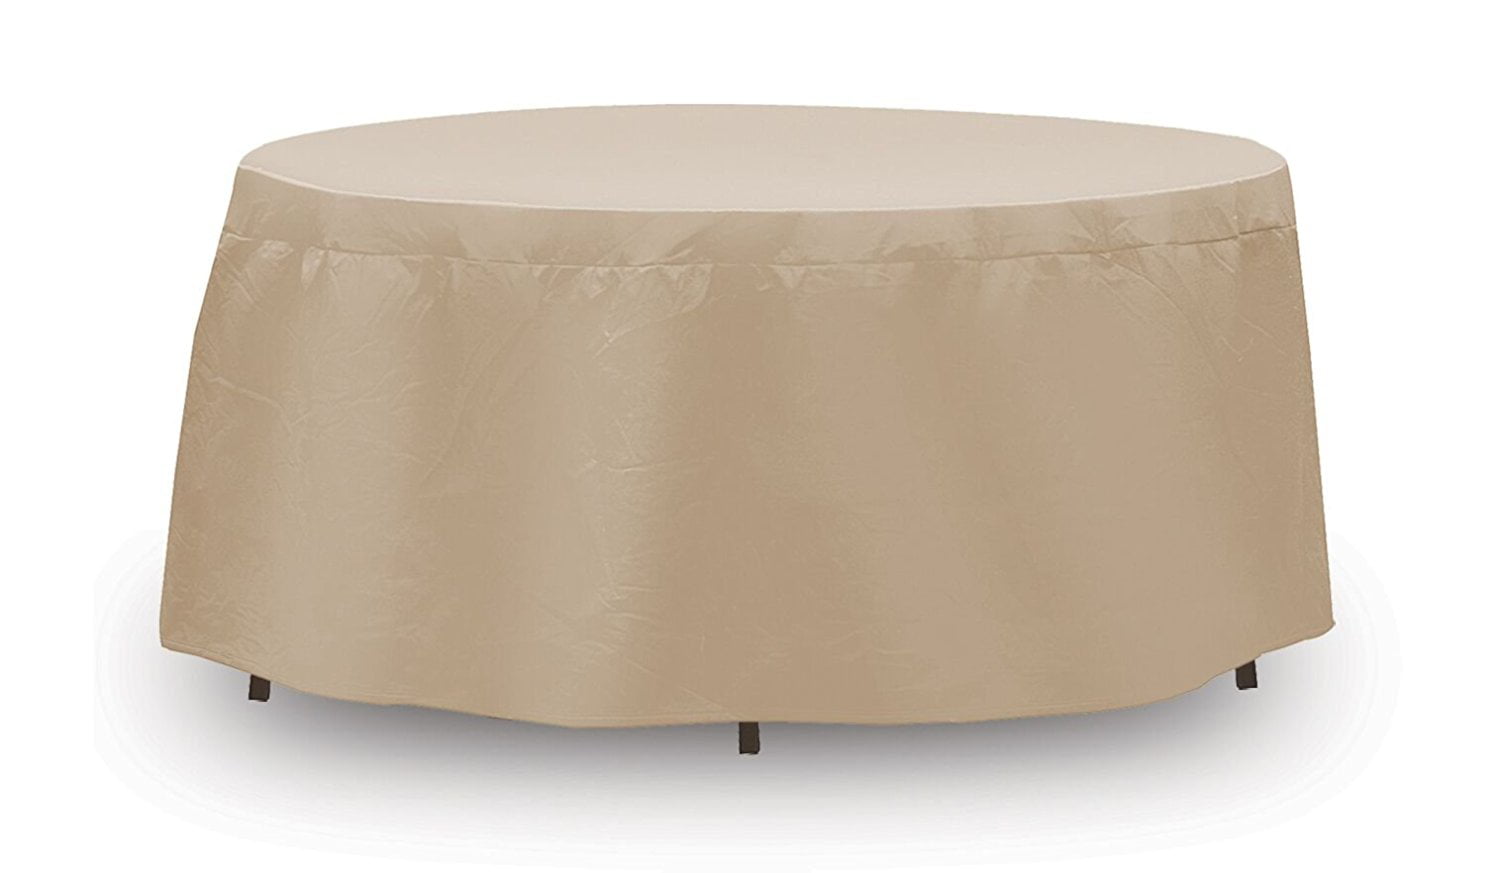 Duck Covers Soteria Waterproof 32 Inch Round Patio Ottoman/Side Table Cover 